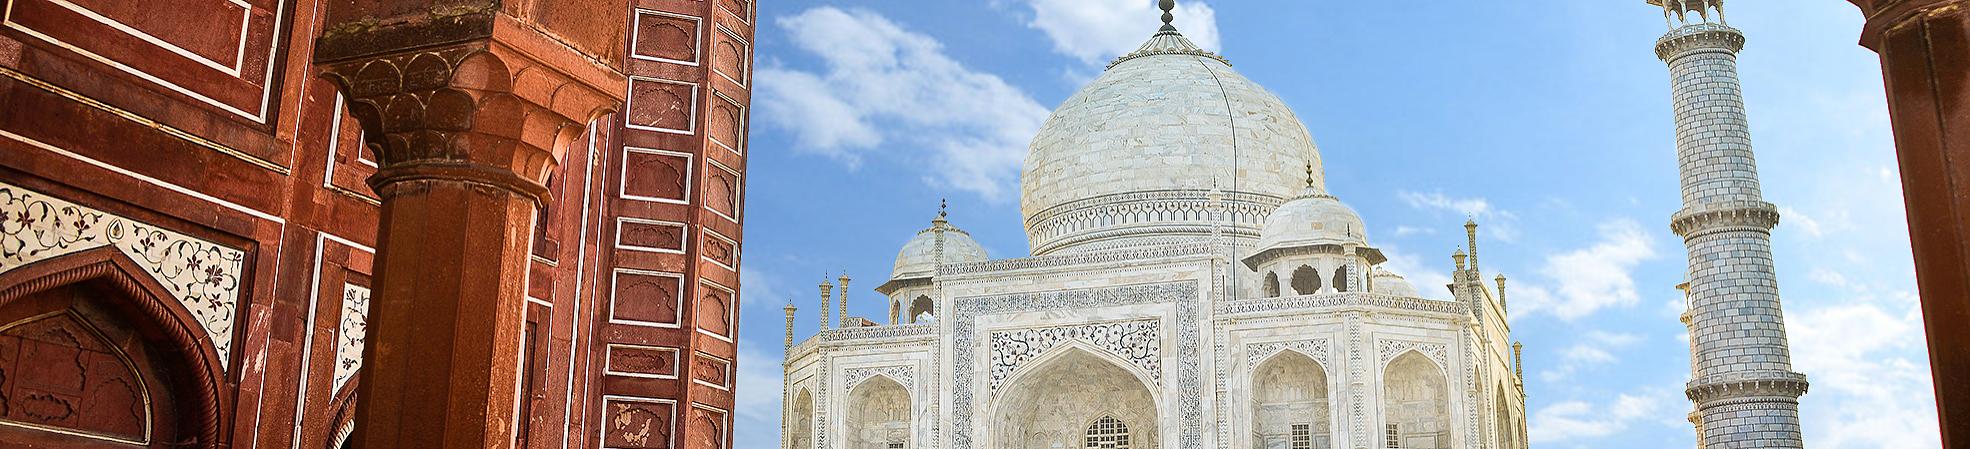 South Asia Private Tours